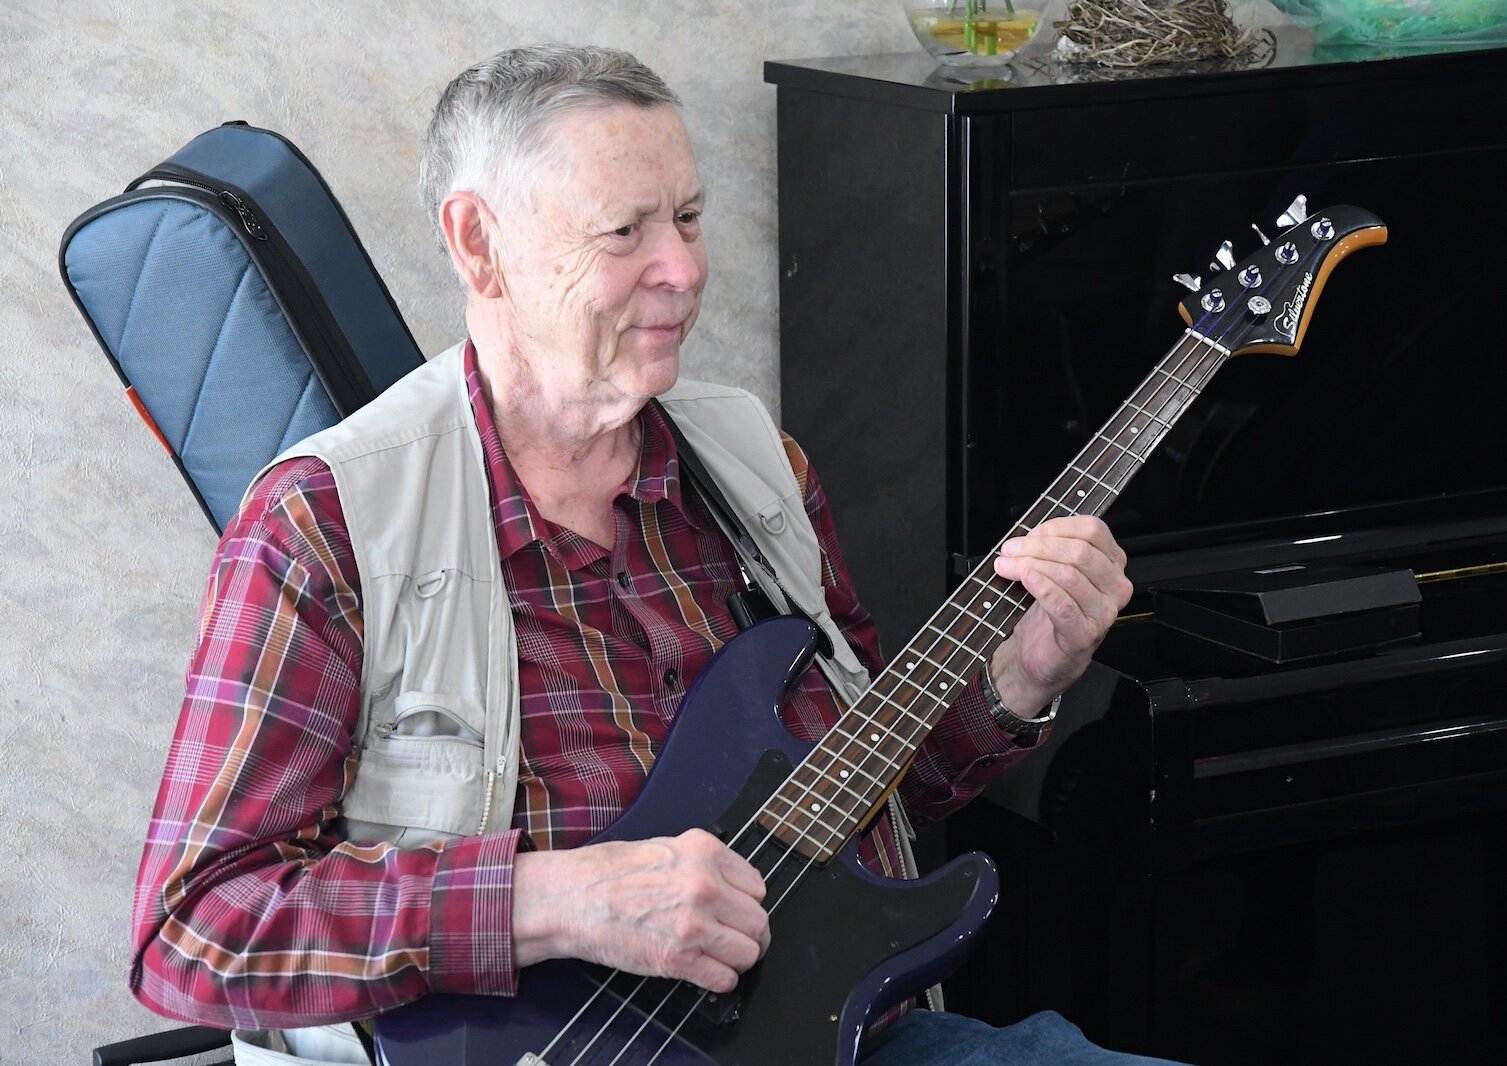 Rendal Wall performs on the electric bass for residents of Park Place Assisted Living in Kalamazoo.